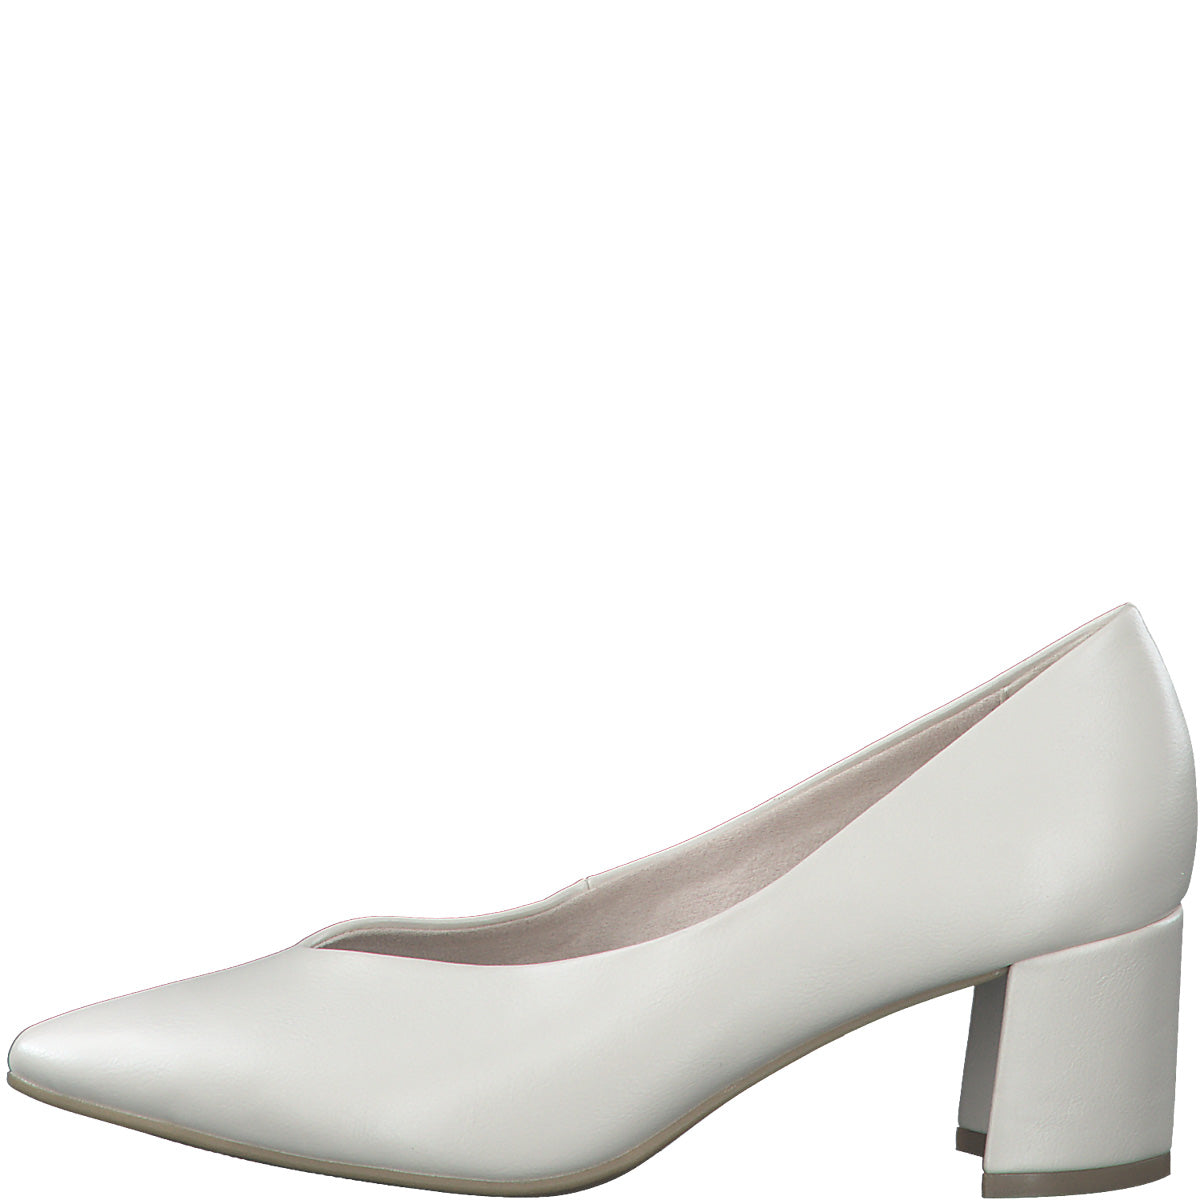 Fancy Smooth Pumps in Cream